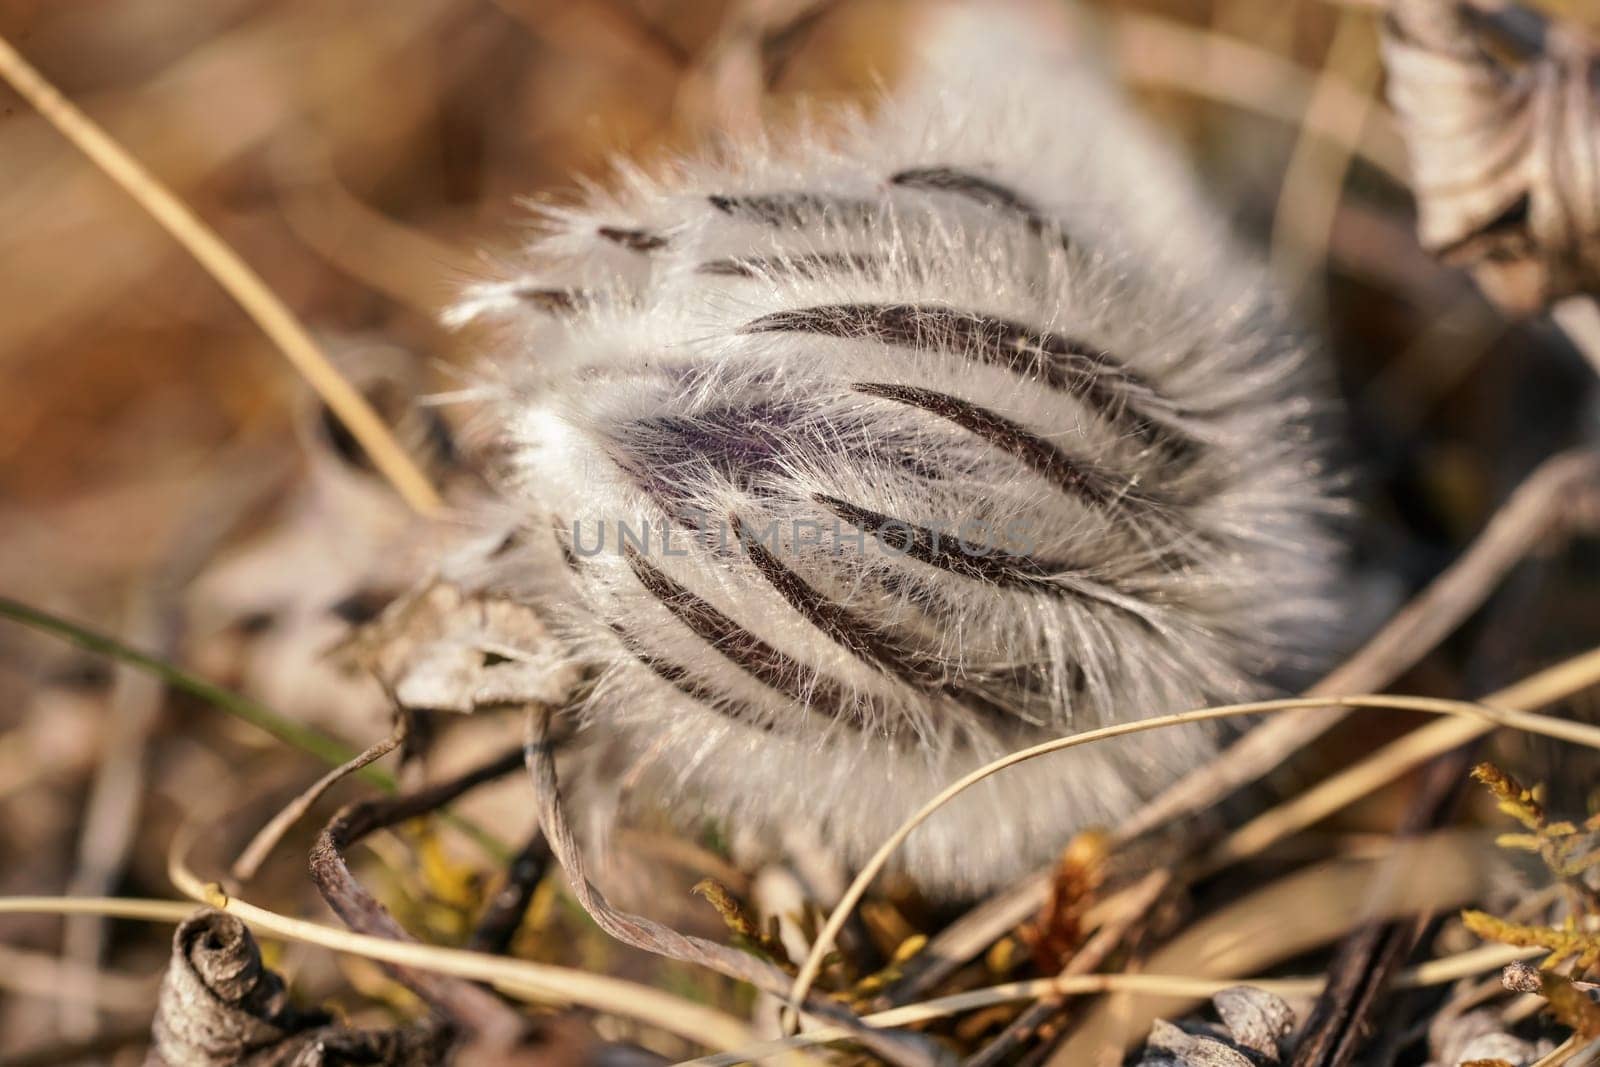 Purple greater pasque flower - Pulsatilla grandis - growing in dry grass, close up detail on hairy unopened plant head